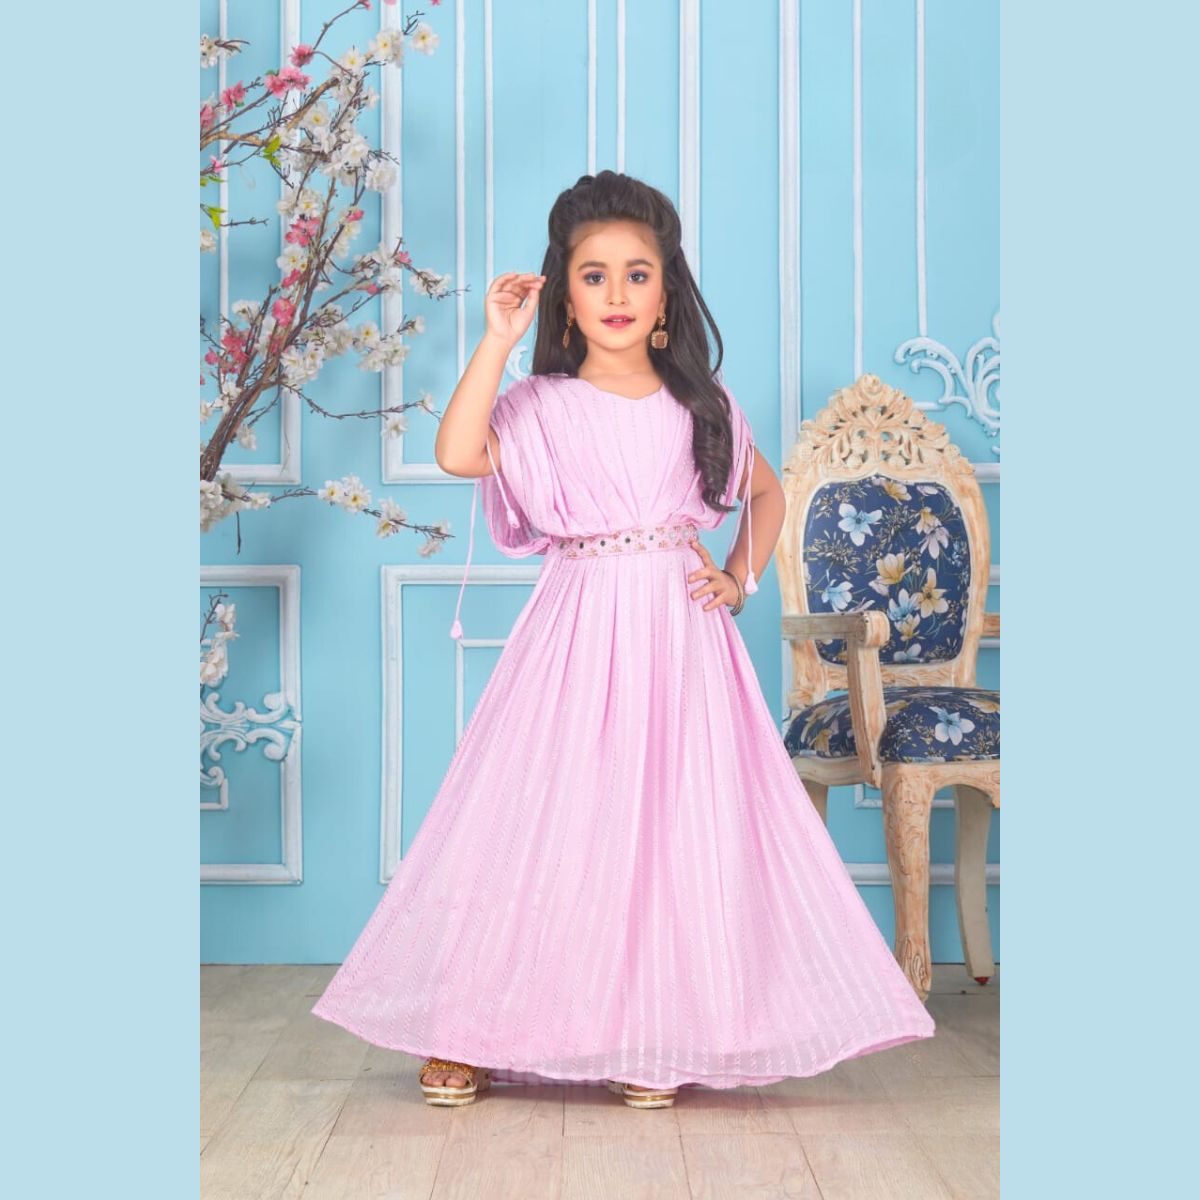 Dresses - Indian Kids Wear: Buy Ethnic Dresses and Clothing for Boys & Girls